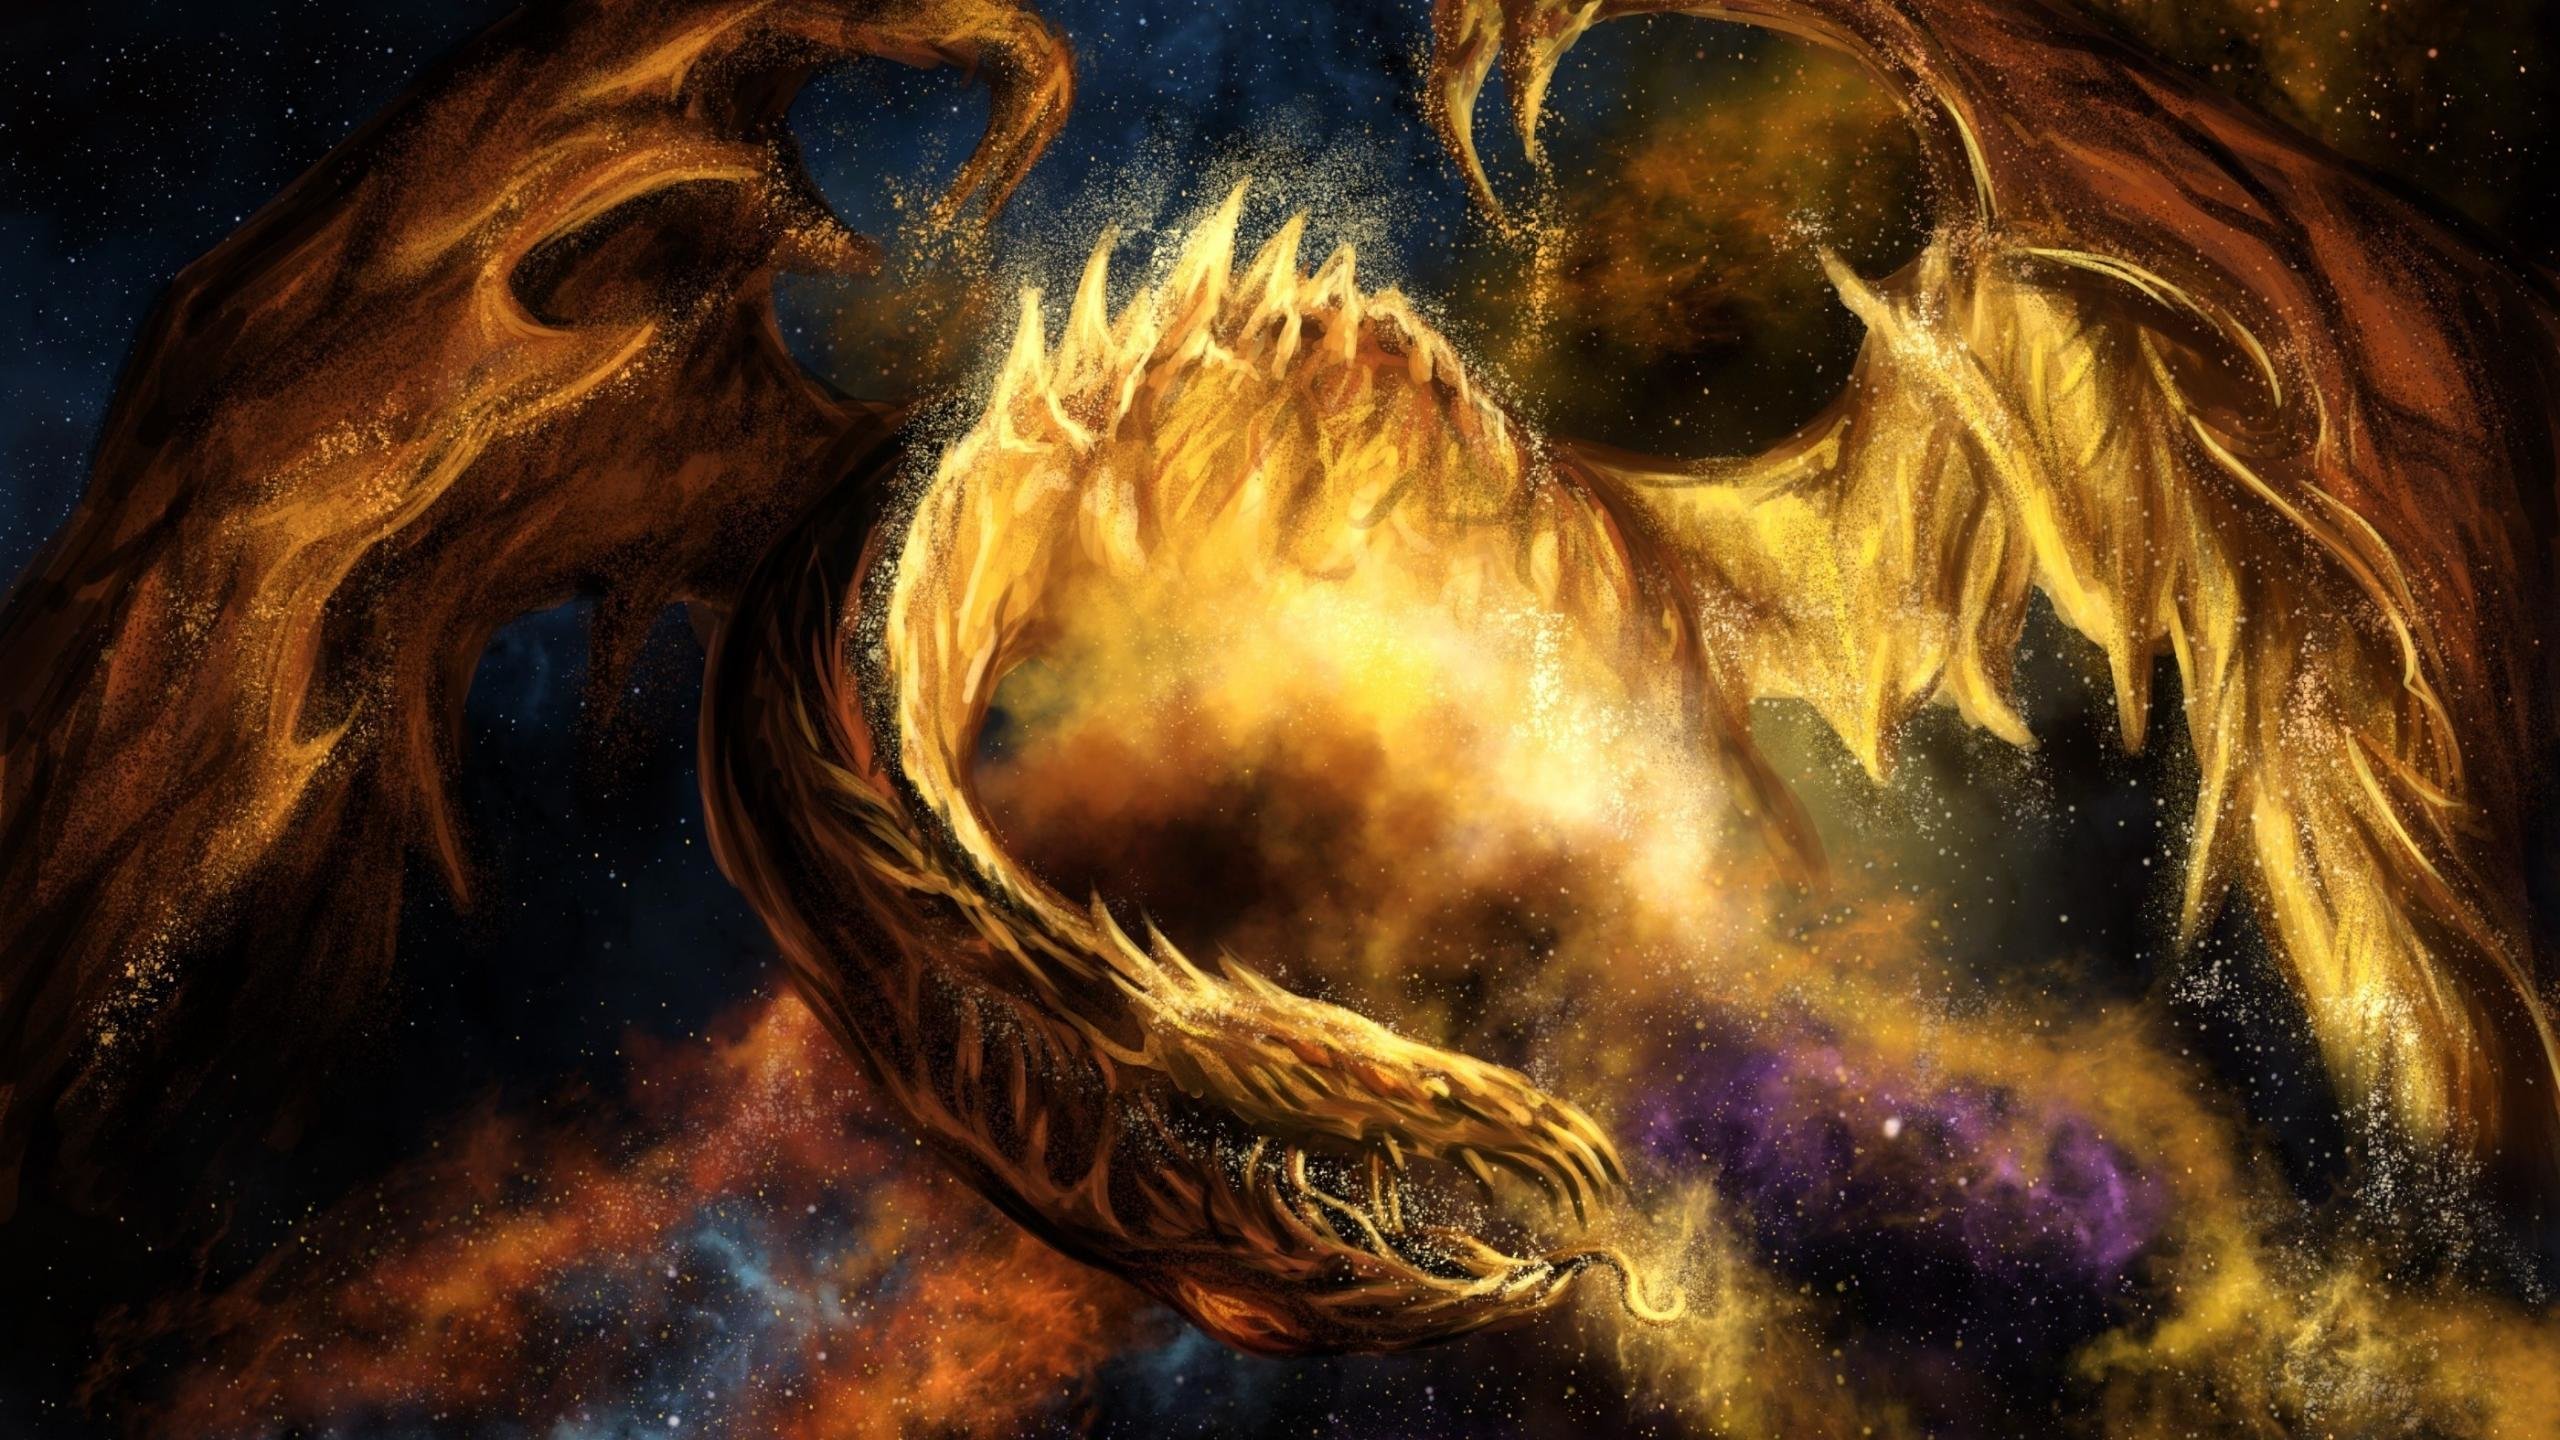 High resolution Dragon hd 2560x1440 background ID:146714 for PC